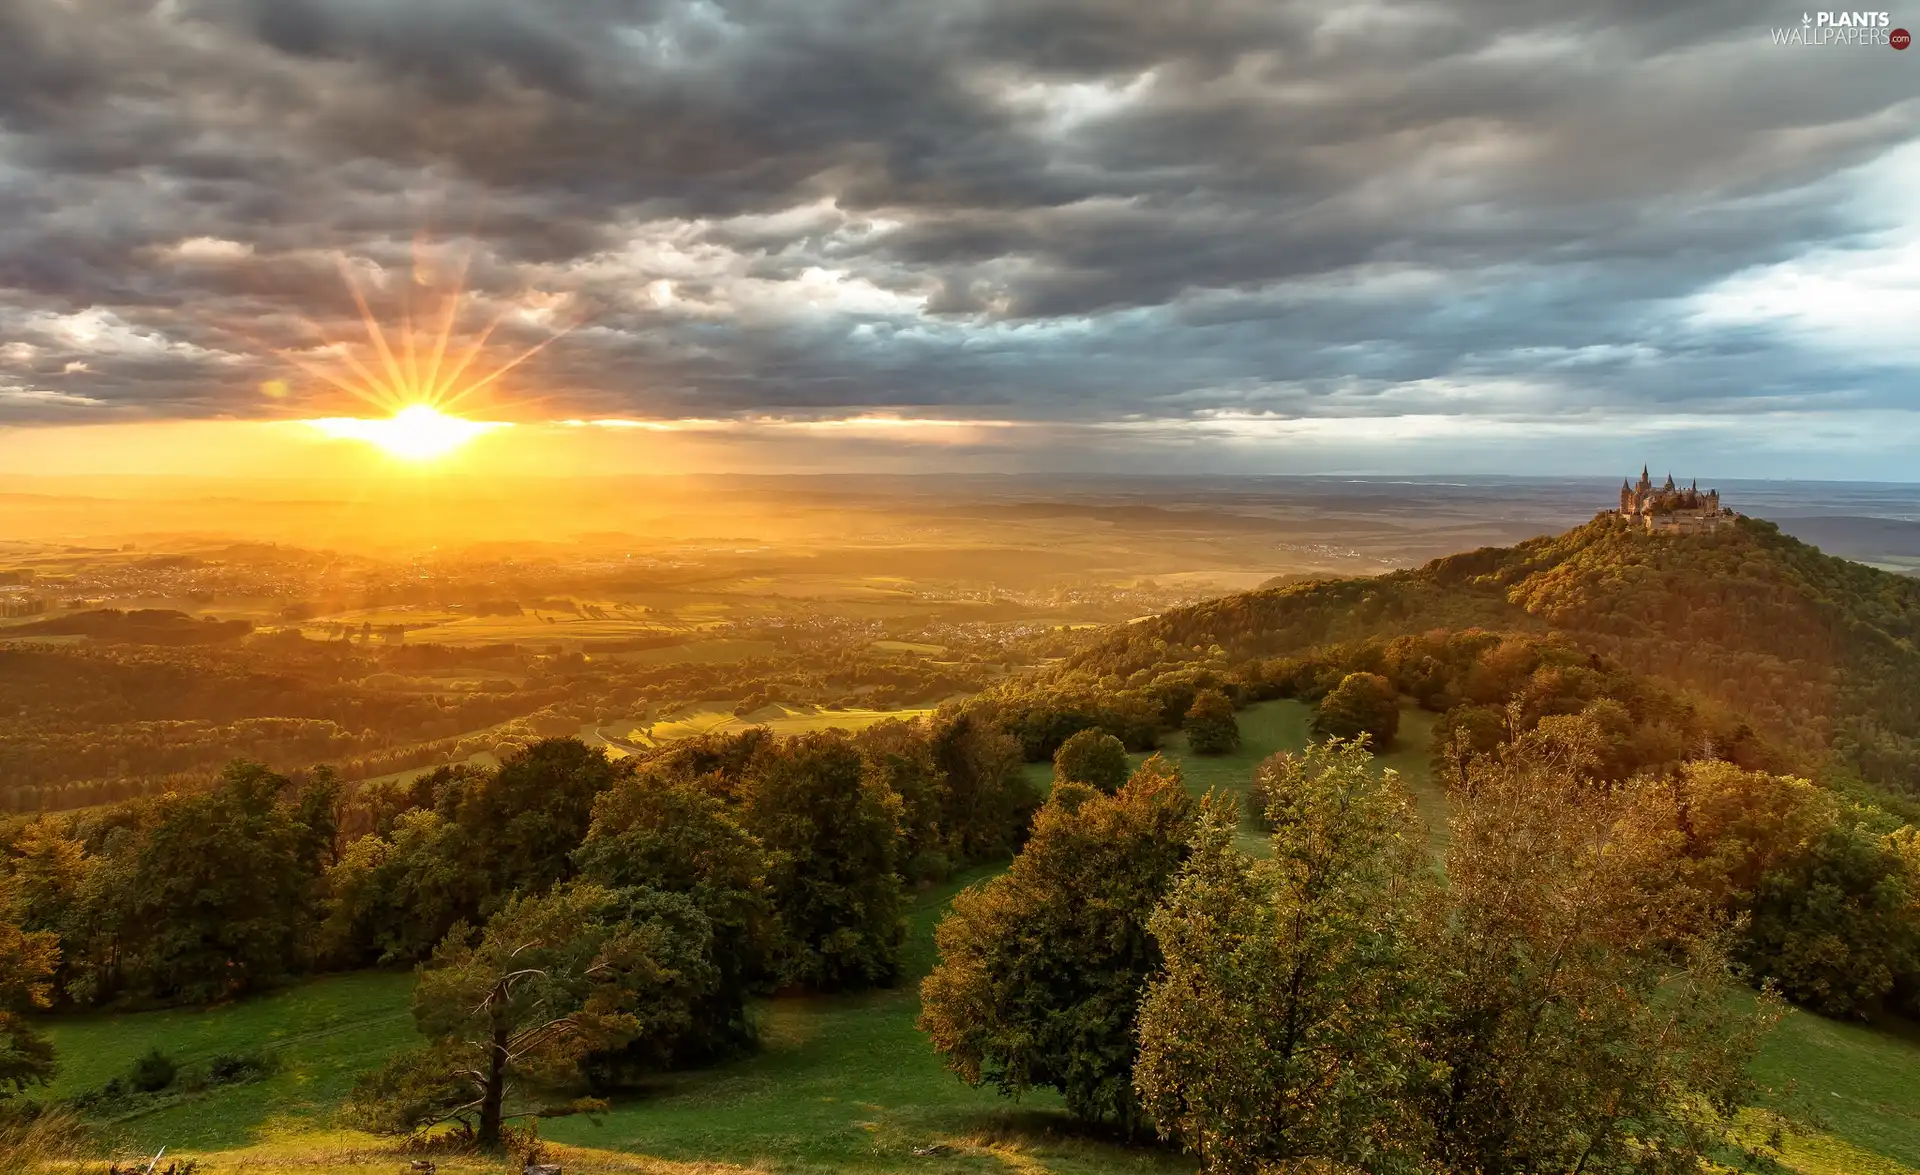 Hohenzollern Castle, Hohenzollern Mountain, trees, viewes, Baden-Württemberg, Germany, clouds, The Hills, Sunrise